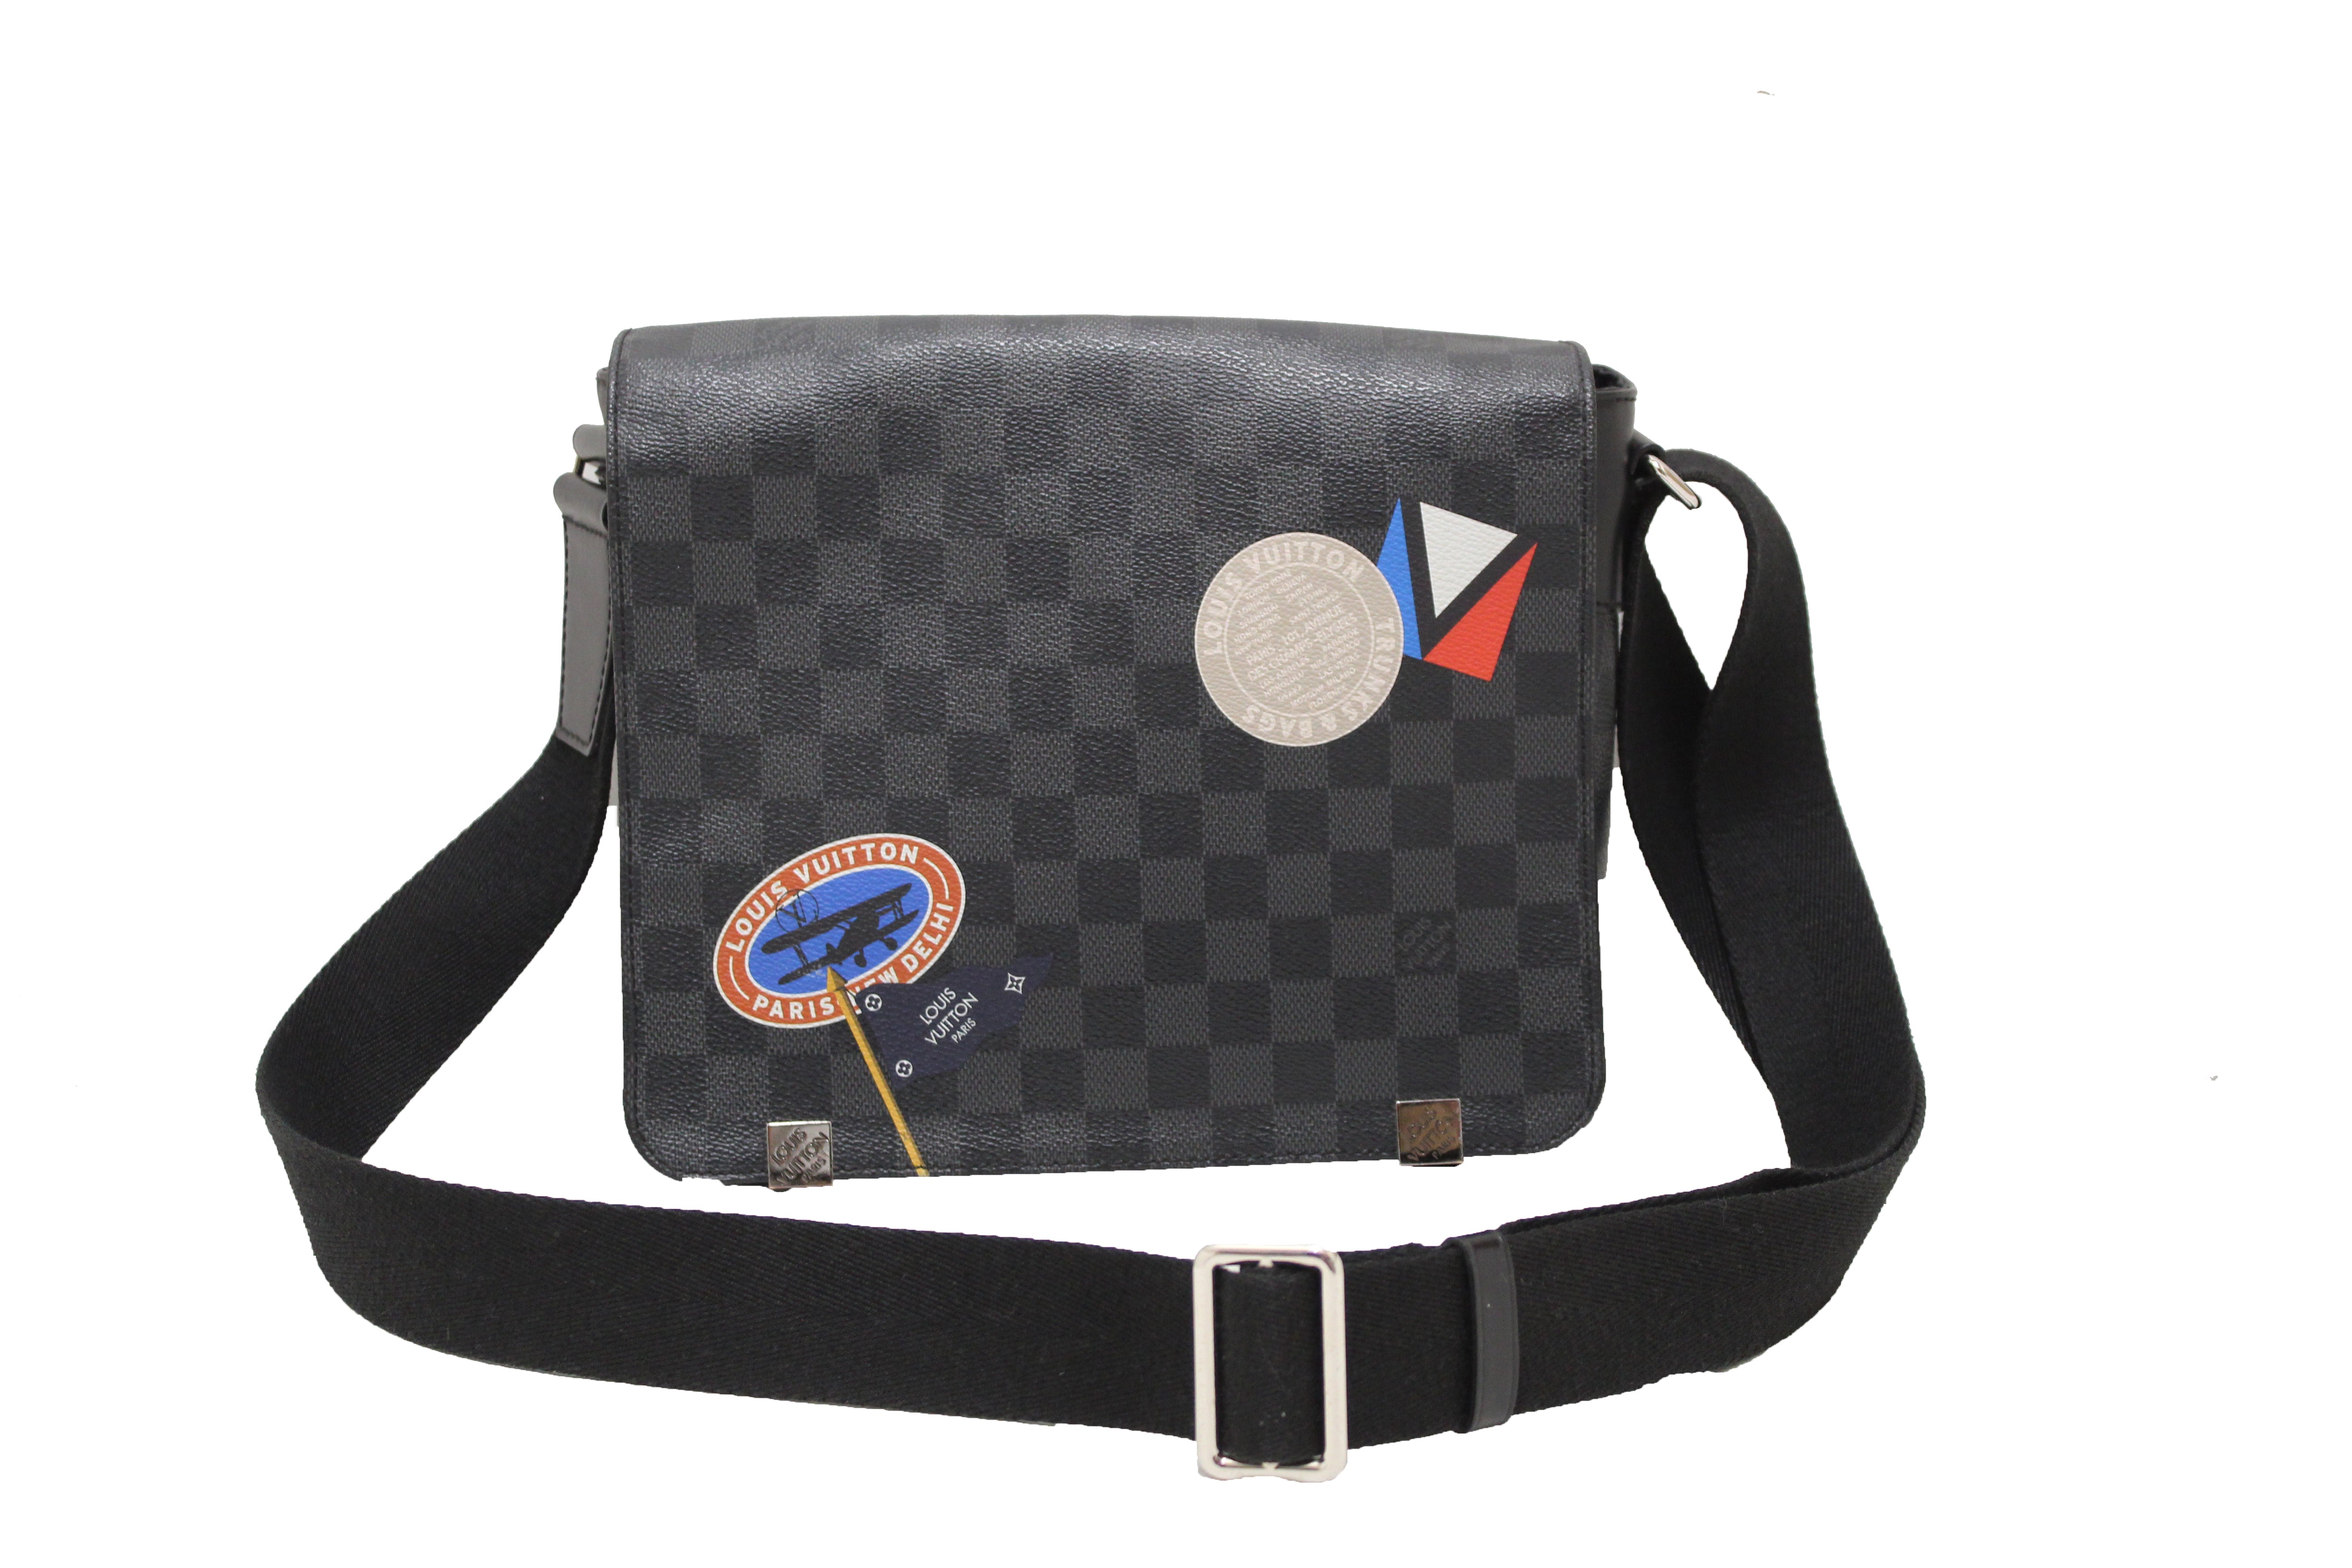 Louis Vuitton lv district messenger cross body bag with patches